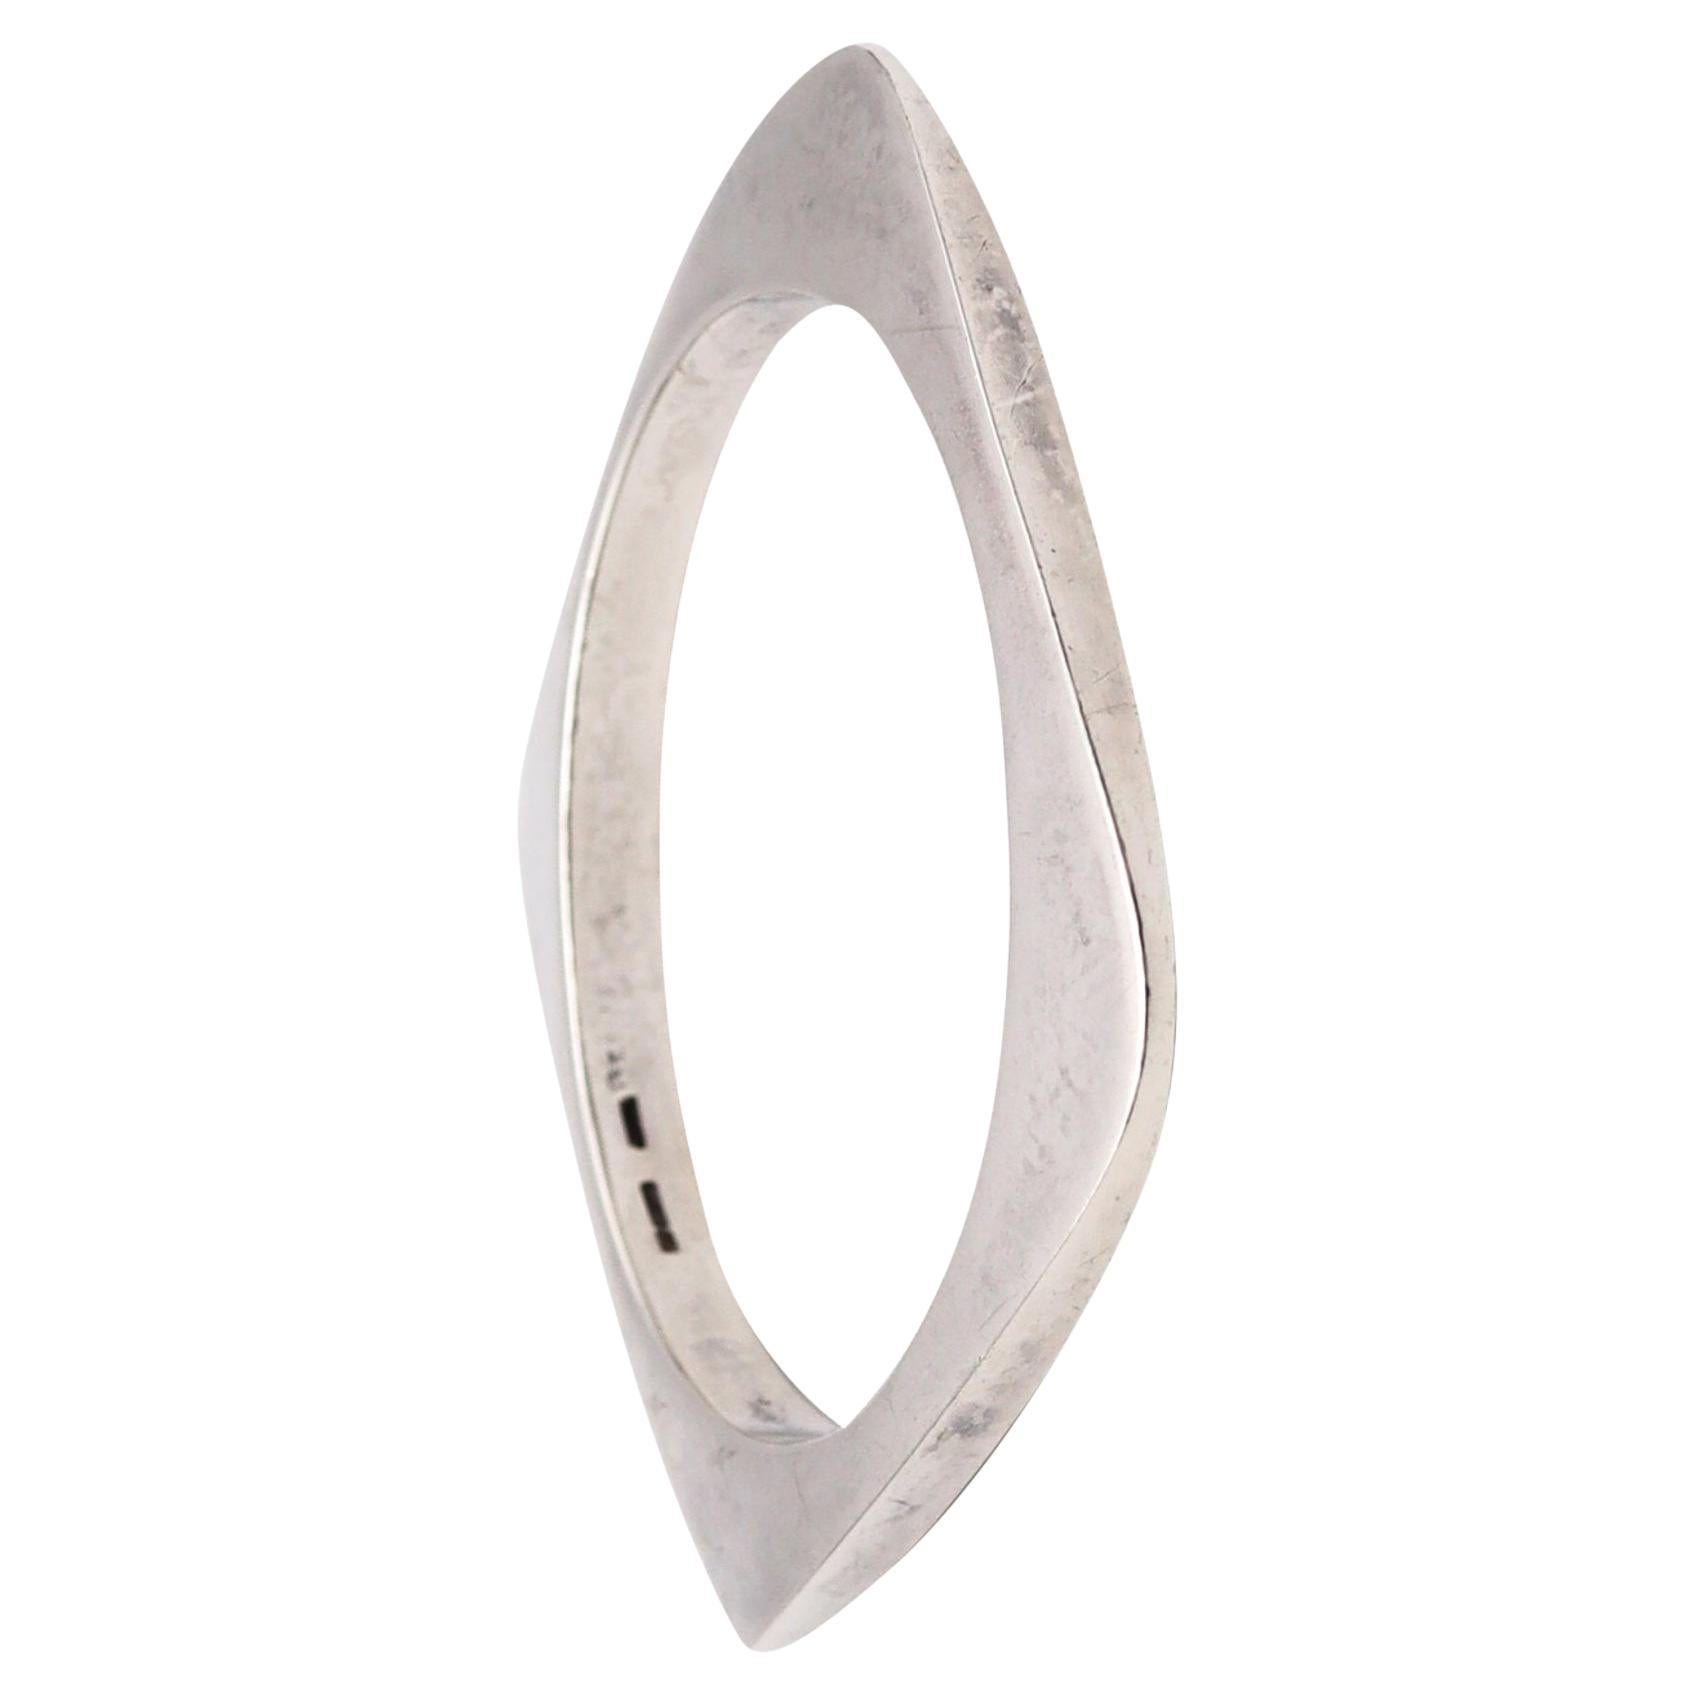 Mexico Modernism 1970 Bold Geometric Bangle Bracelet In .925 Sterling Silver For Sale